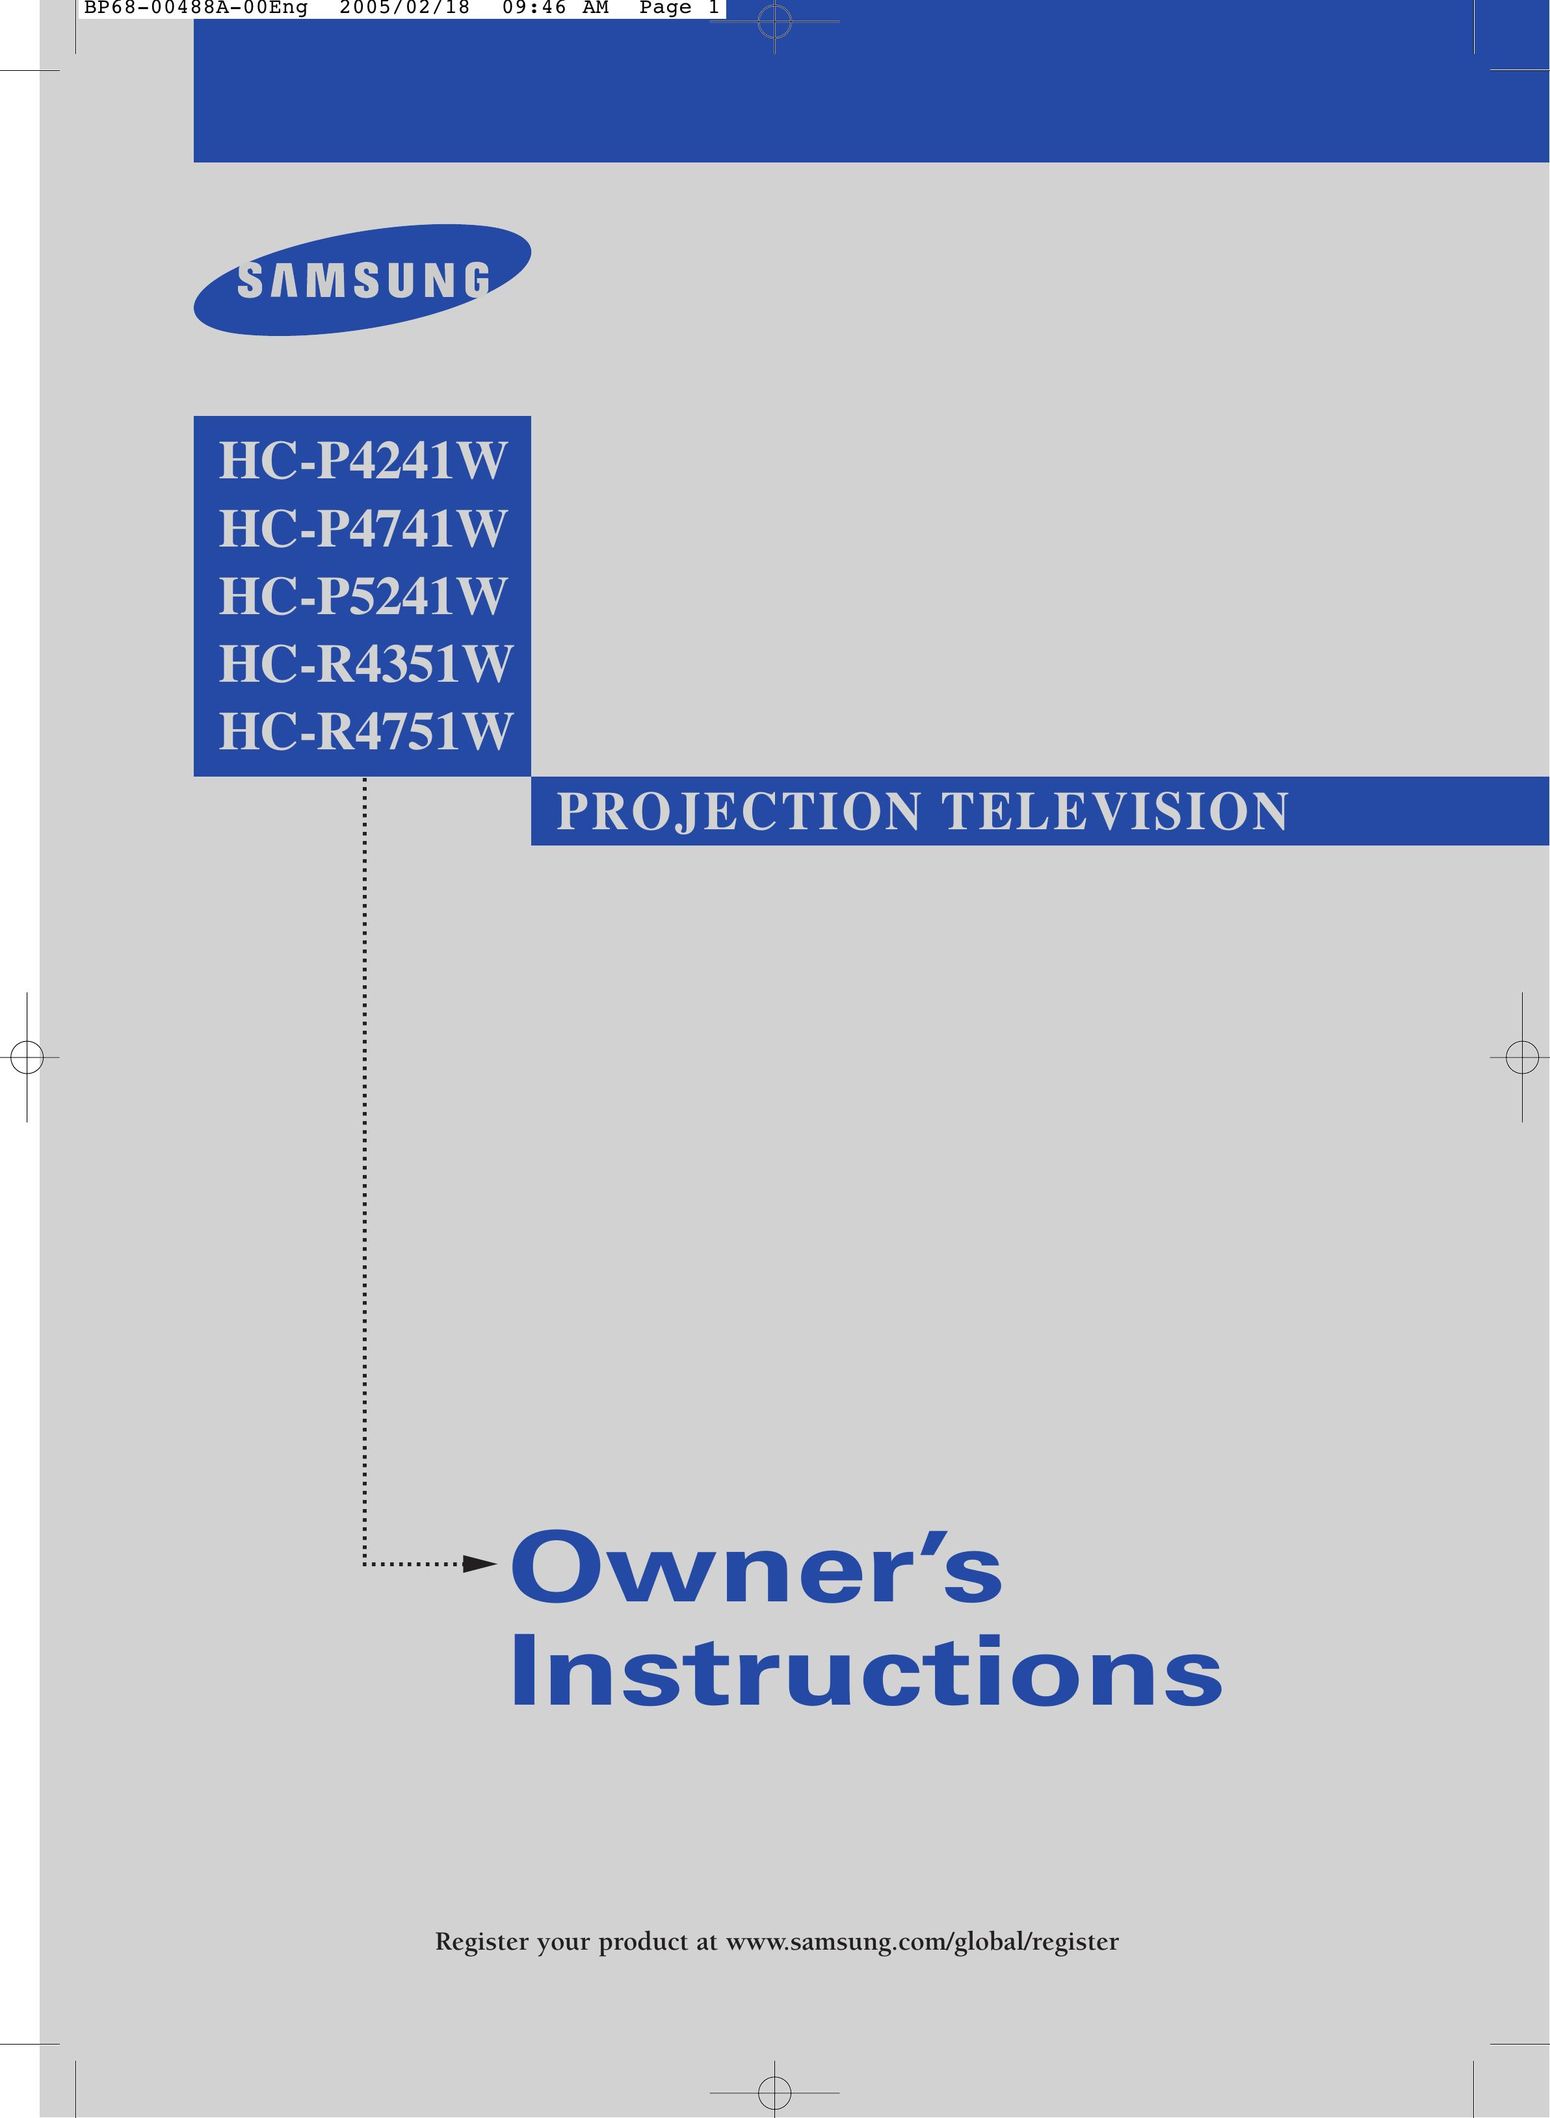 Samsung HC-R4351W Projection Television User Manual